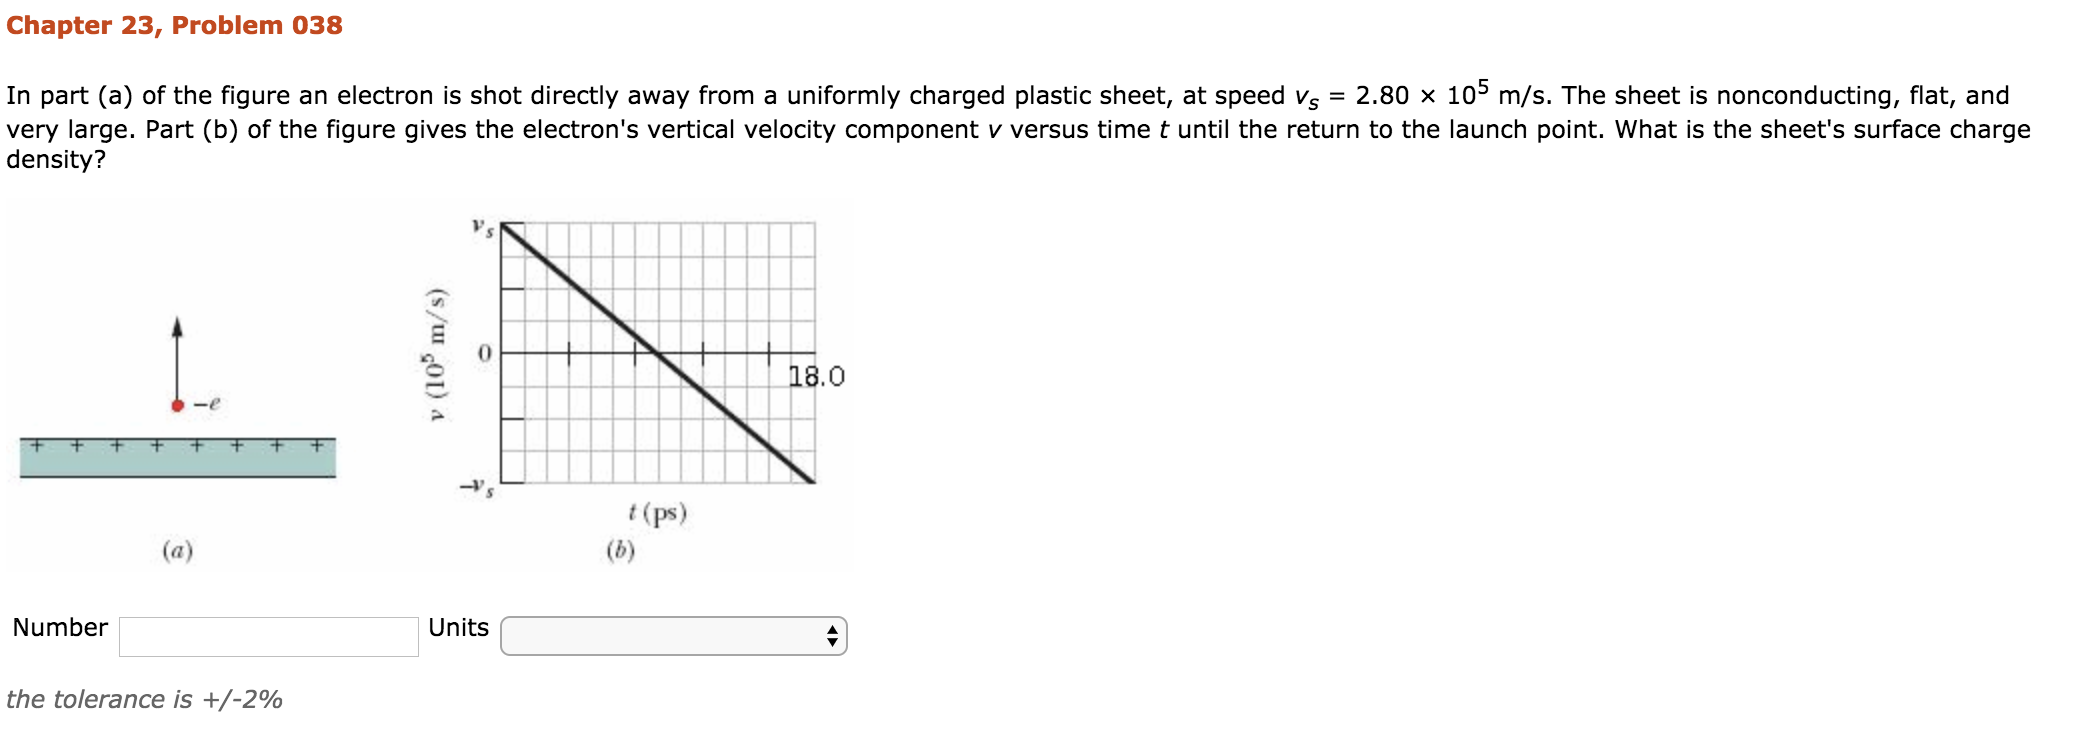 Chapter 23, Problem 038
In part (a) of the figure an electron is shot directly away from a uniformly charged plastic sheet, at speed vs-2.80 x 105 m/s. The sheet is nonconducting, flat, and
very large. Part (b) of the figure gives the electron's vertical velocity component v versus time t until the return to the launch point. What is the sheet's surface charge
density?
09
0
18.0
(ps)
Number
Units
the tolerance is +/-2%
